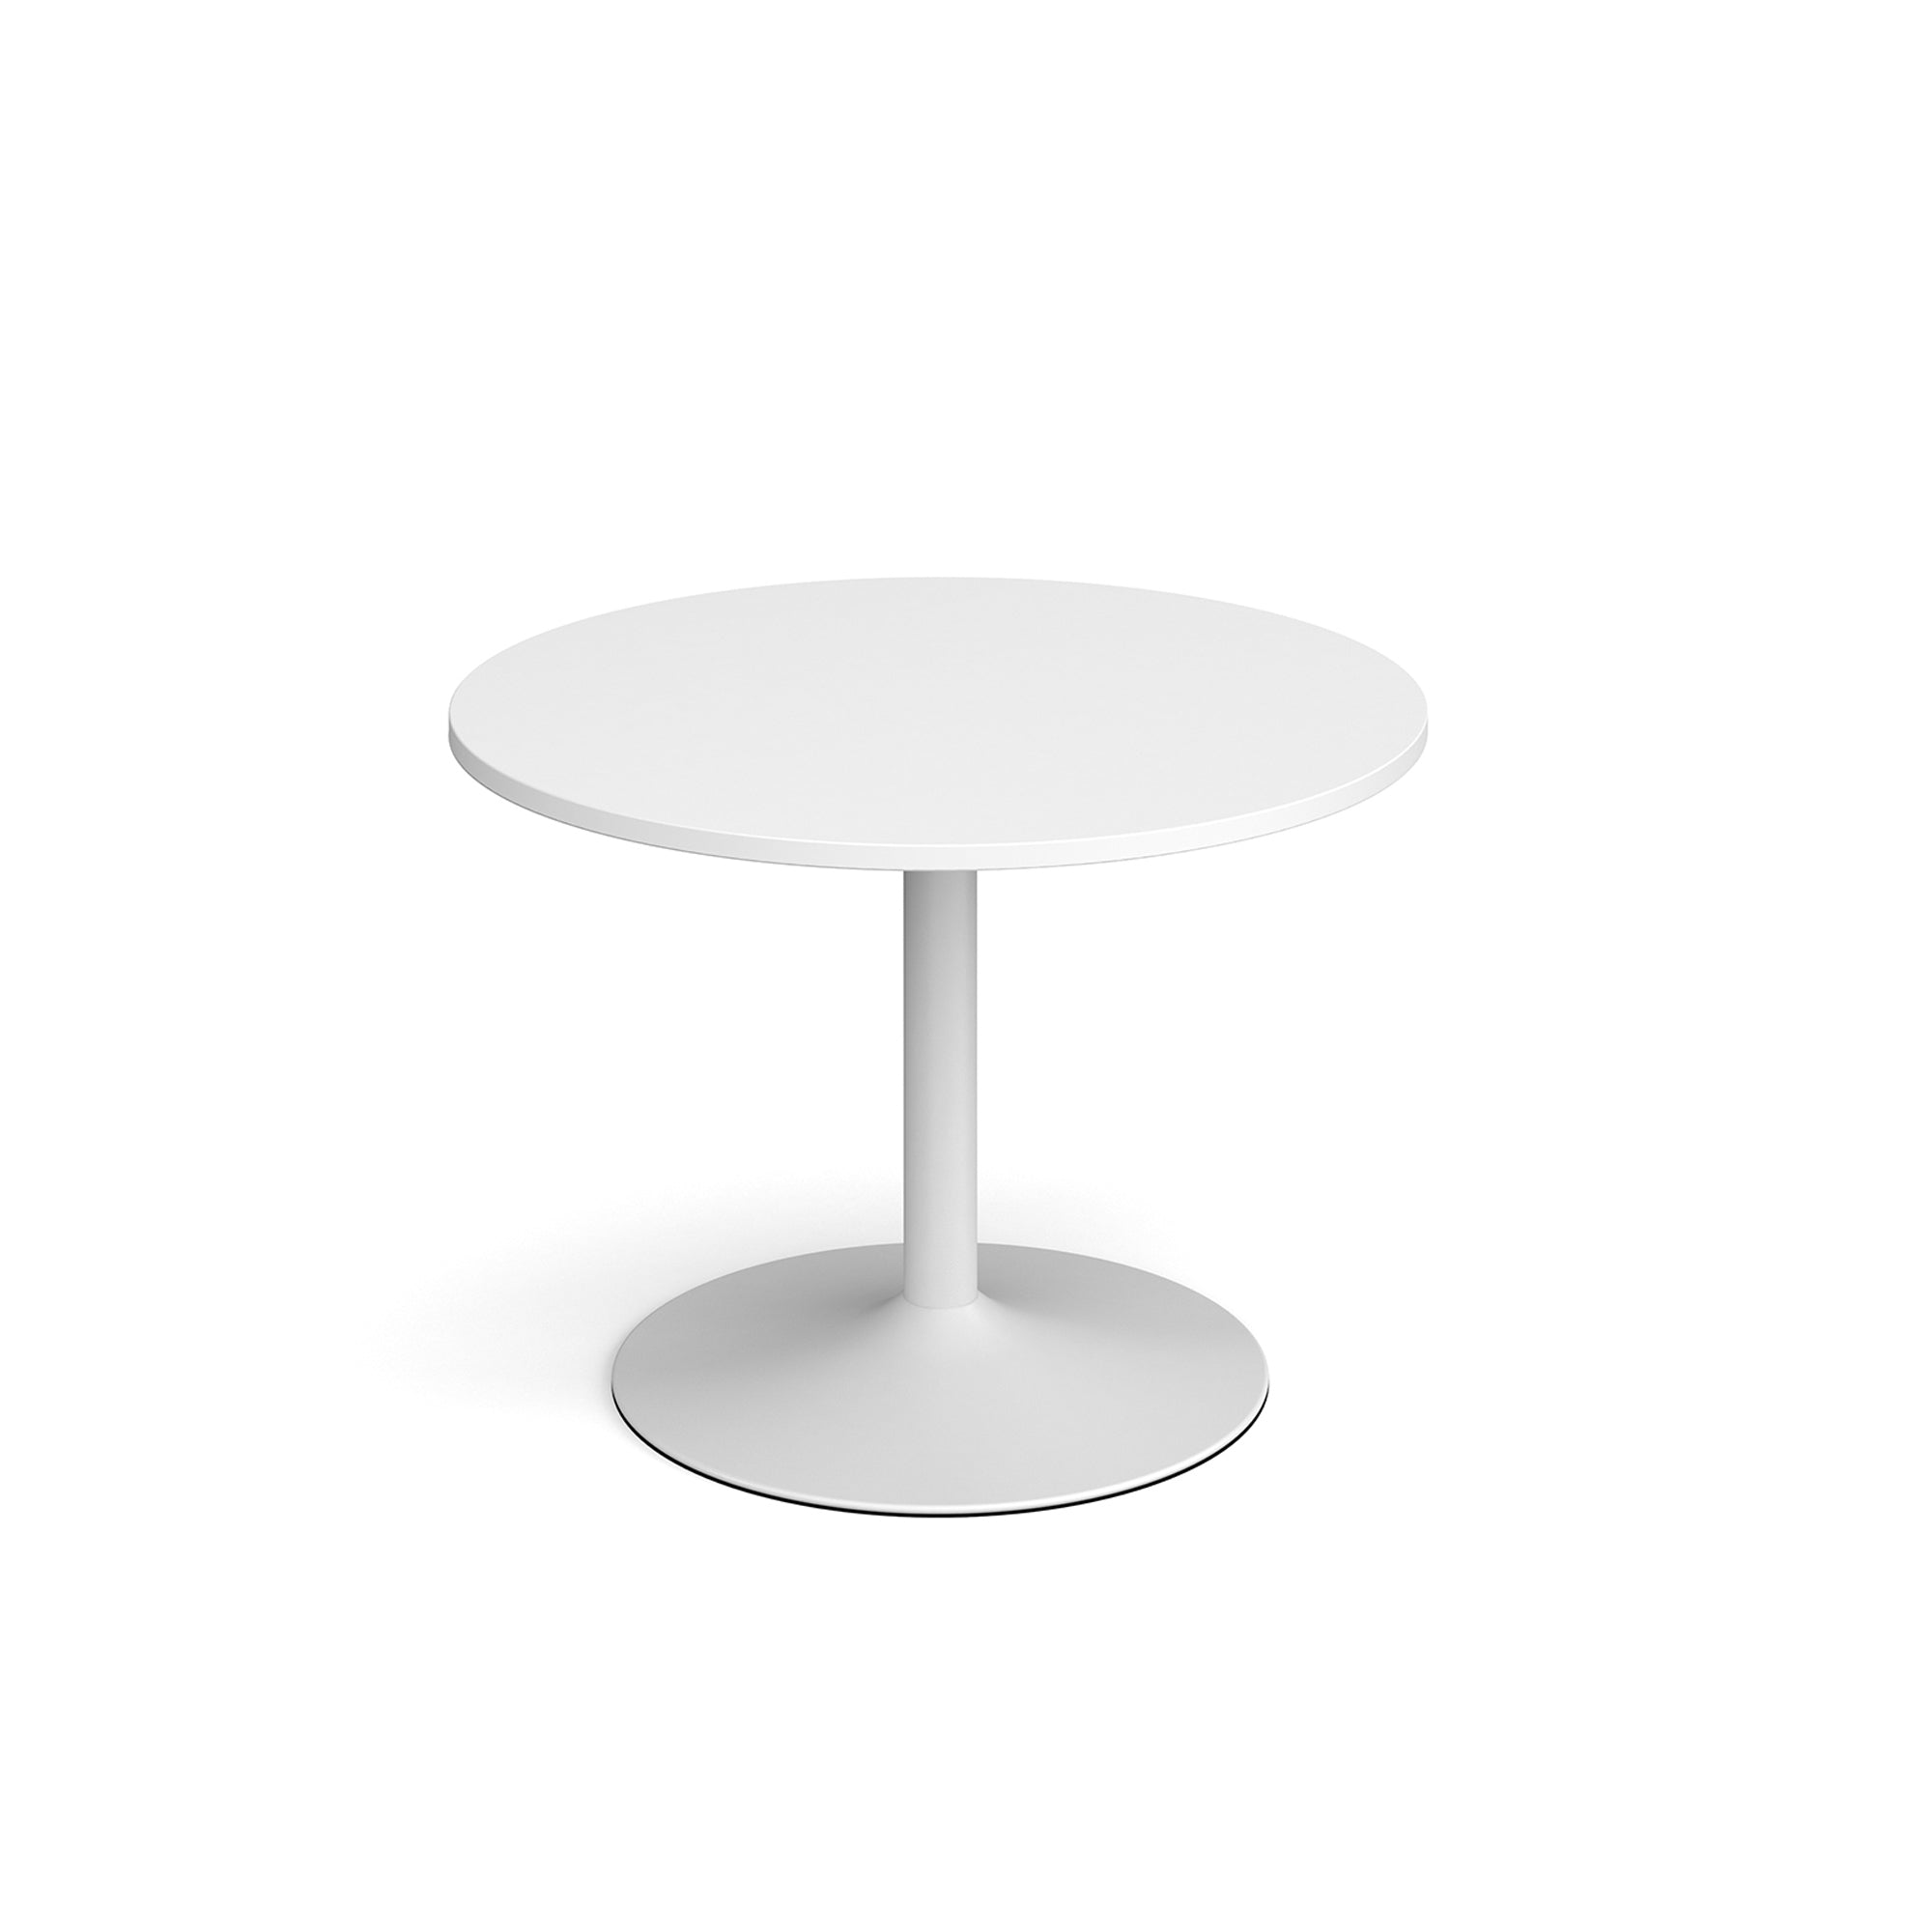 Genoa circular dining table with trumpet base - Office Products Online